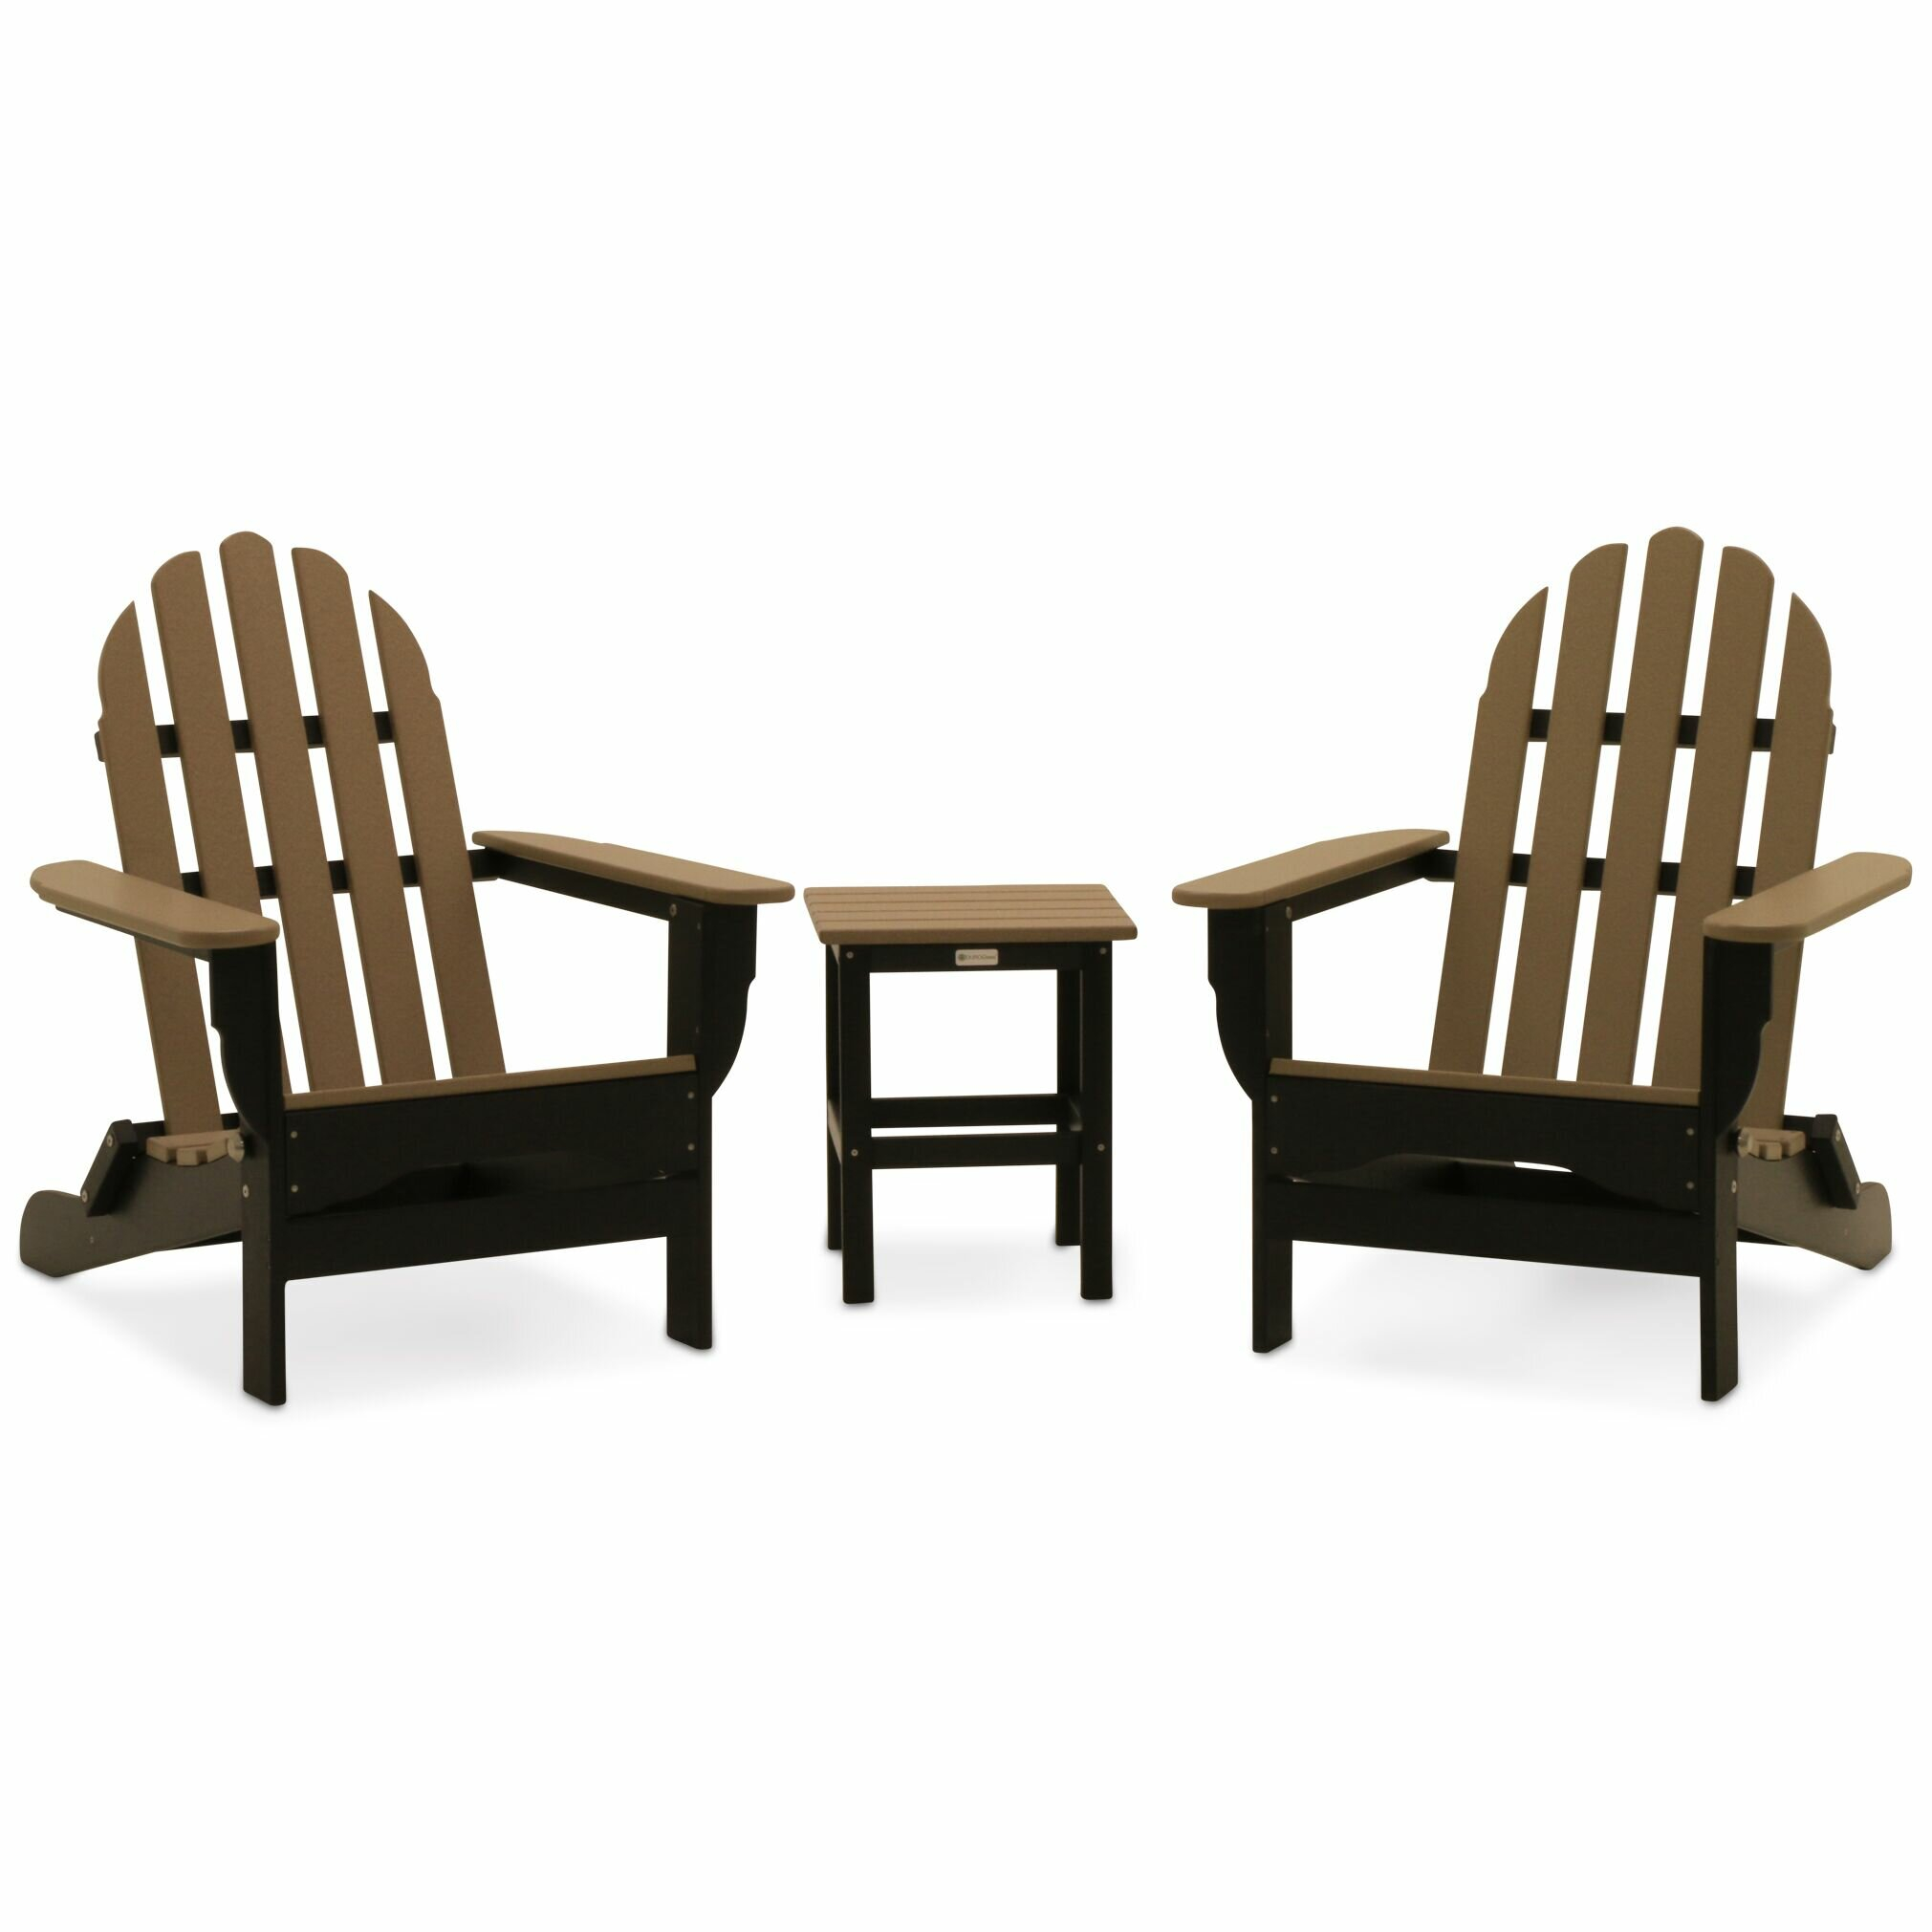 Paterson Adirondack 3 Piece Seating Group within sizing 2021 X 2021